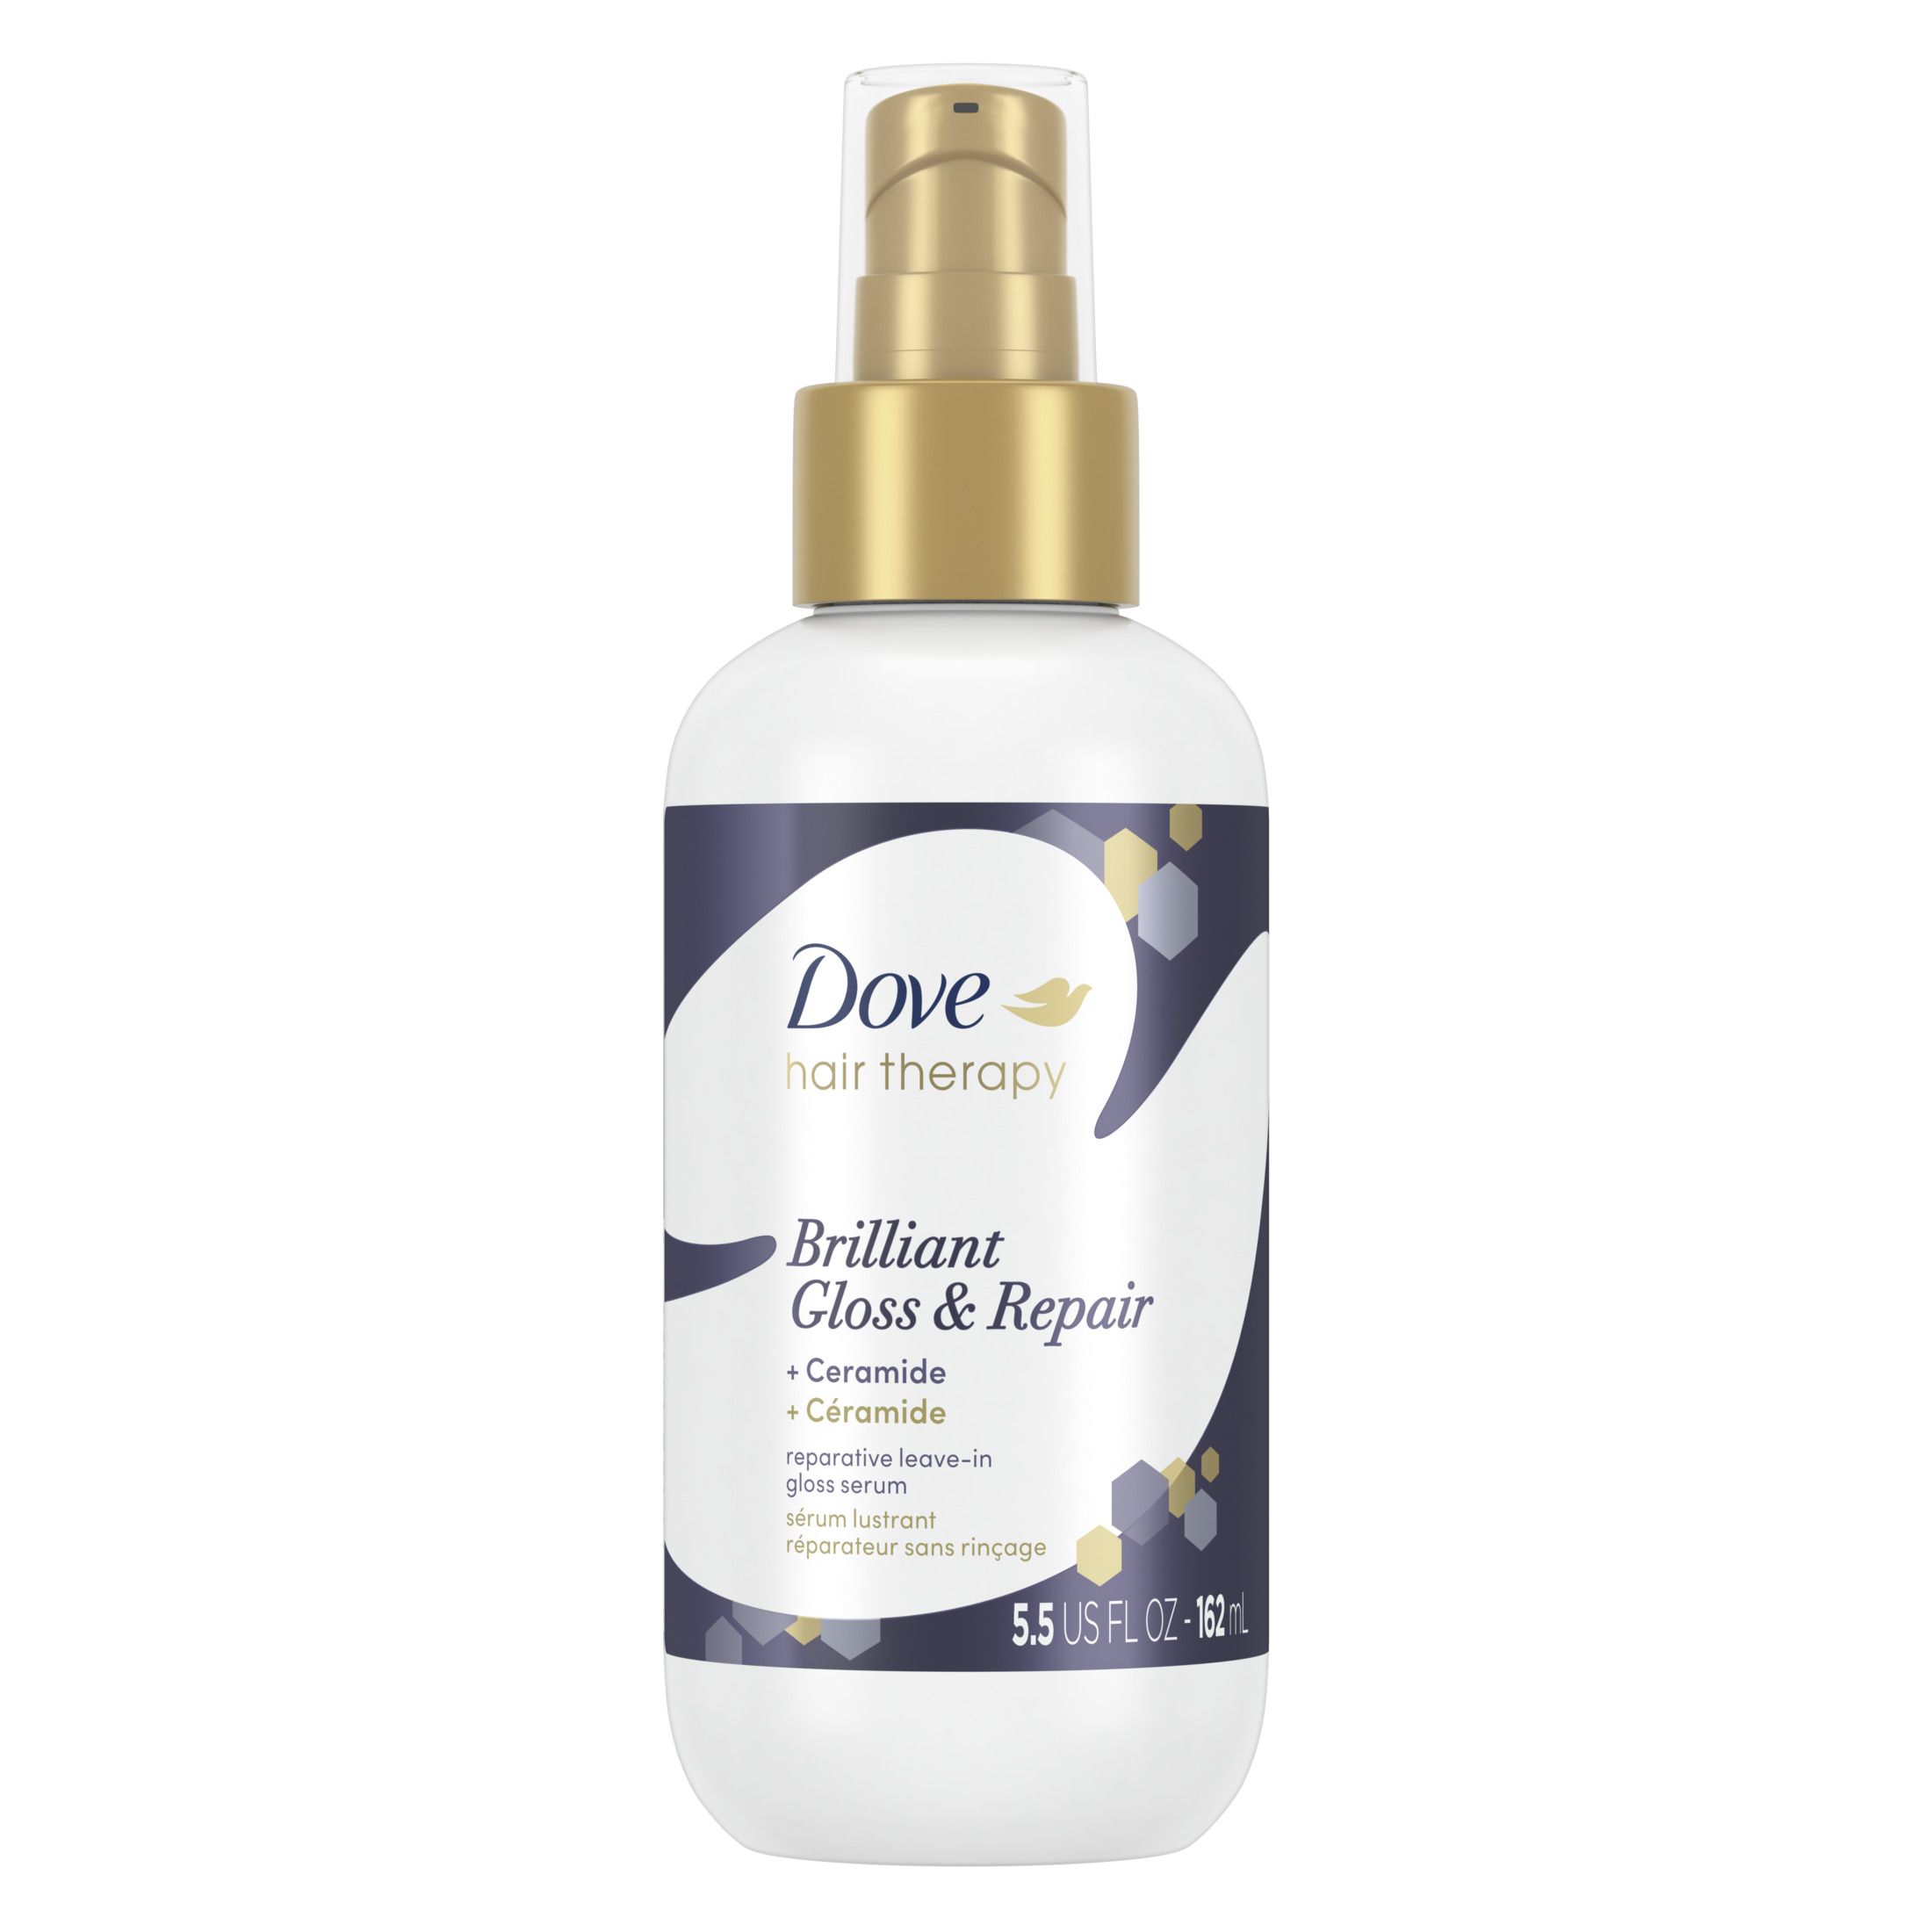 Dove Hair Therapy Leave-in Hair Treatment Brilliant Gloss & Repair